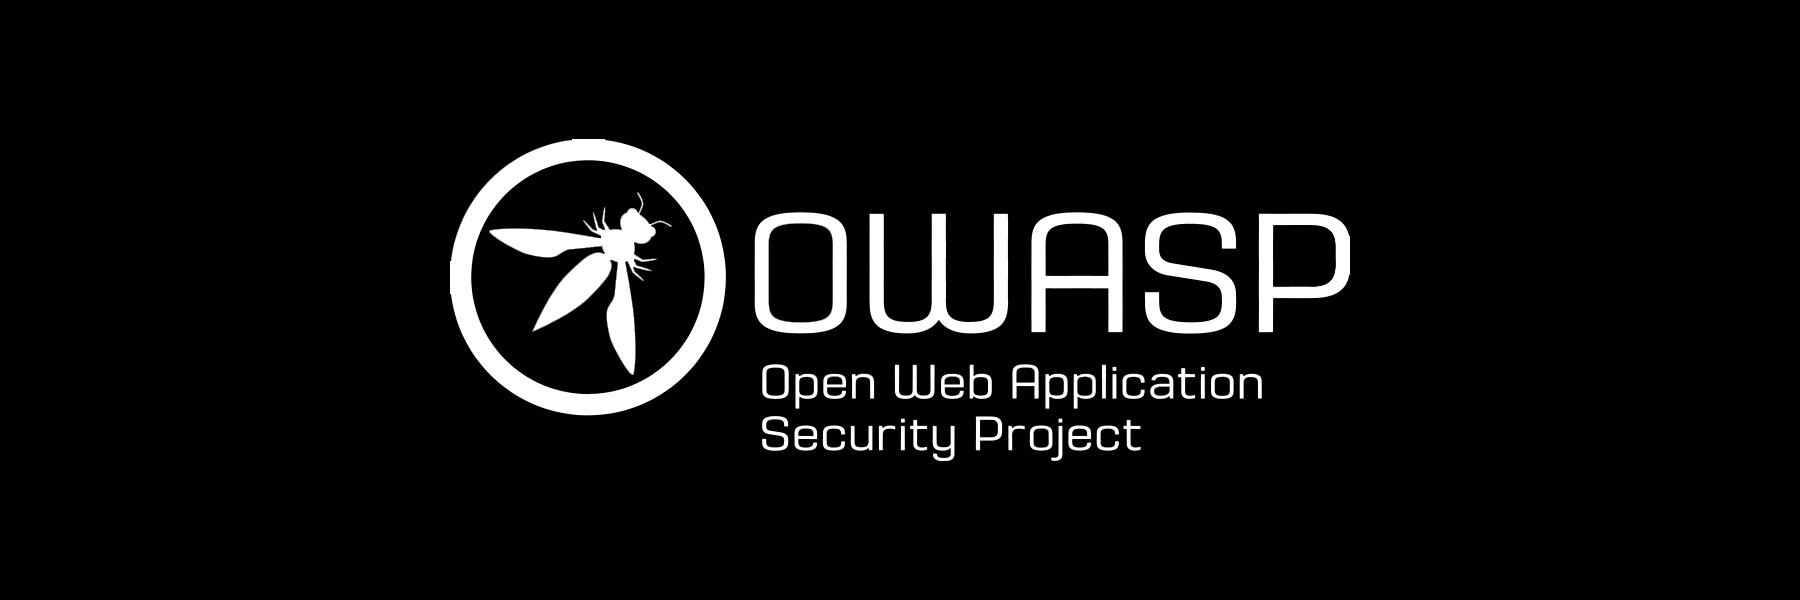 OWASP Open Web Application Security Project Banner SafeAeon